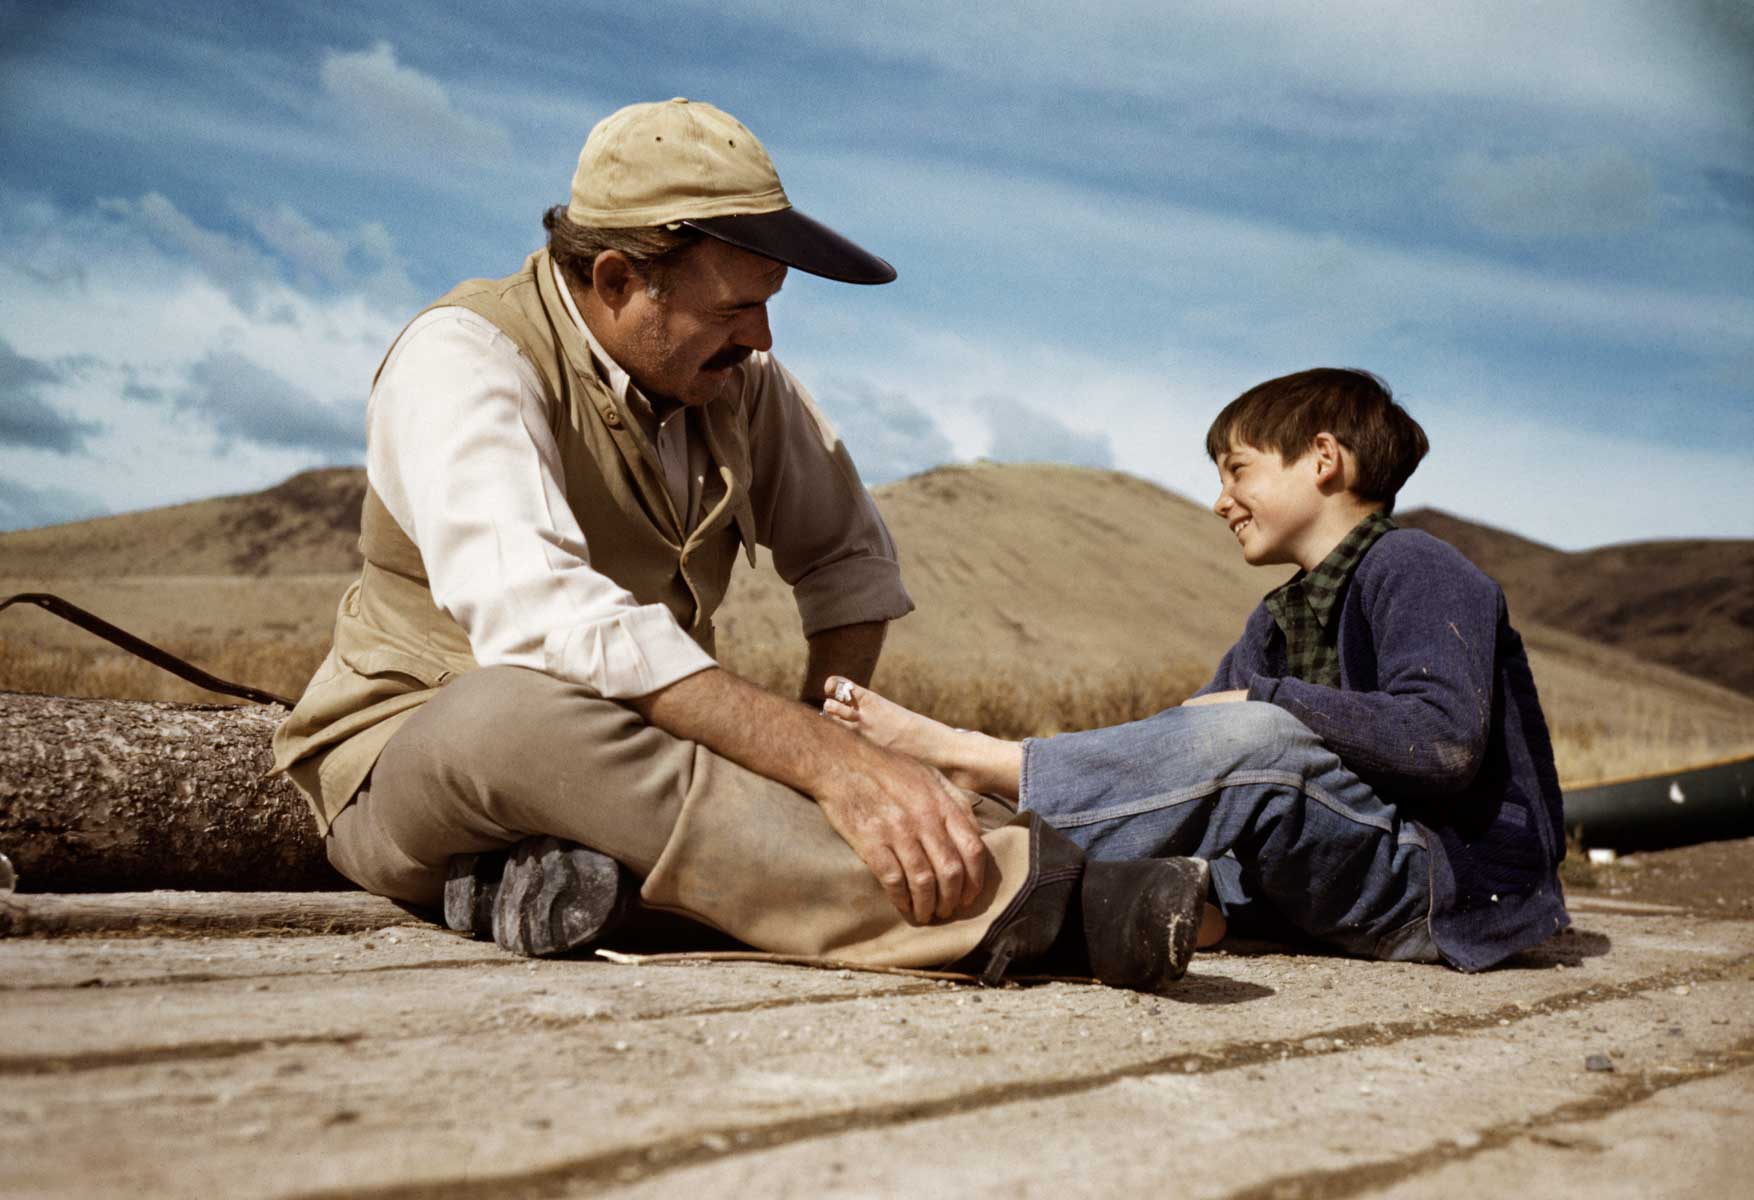 Ernest Hemingway and his son Gregory, Sun Valley, Idaho, Oct. 1941.